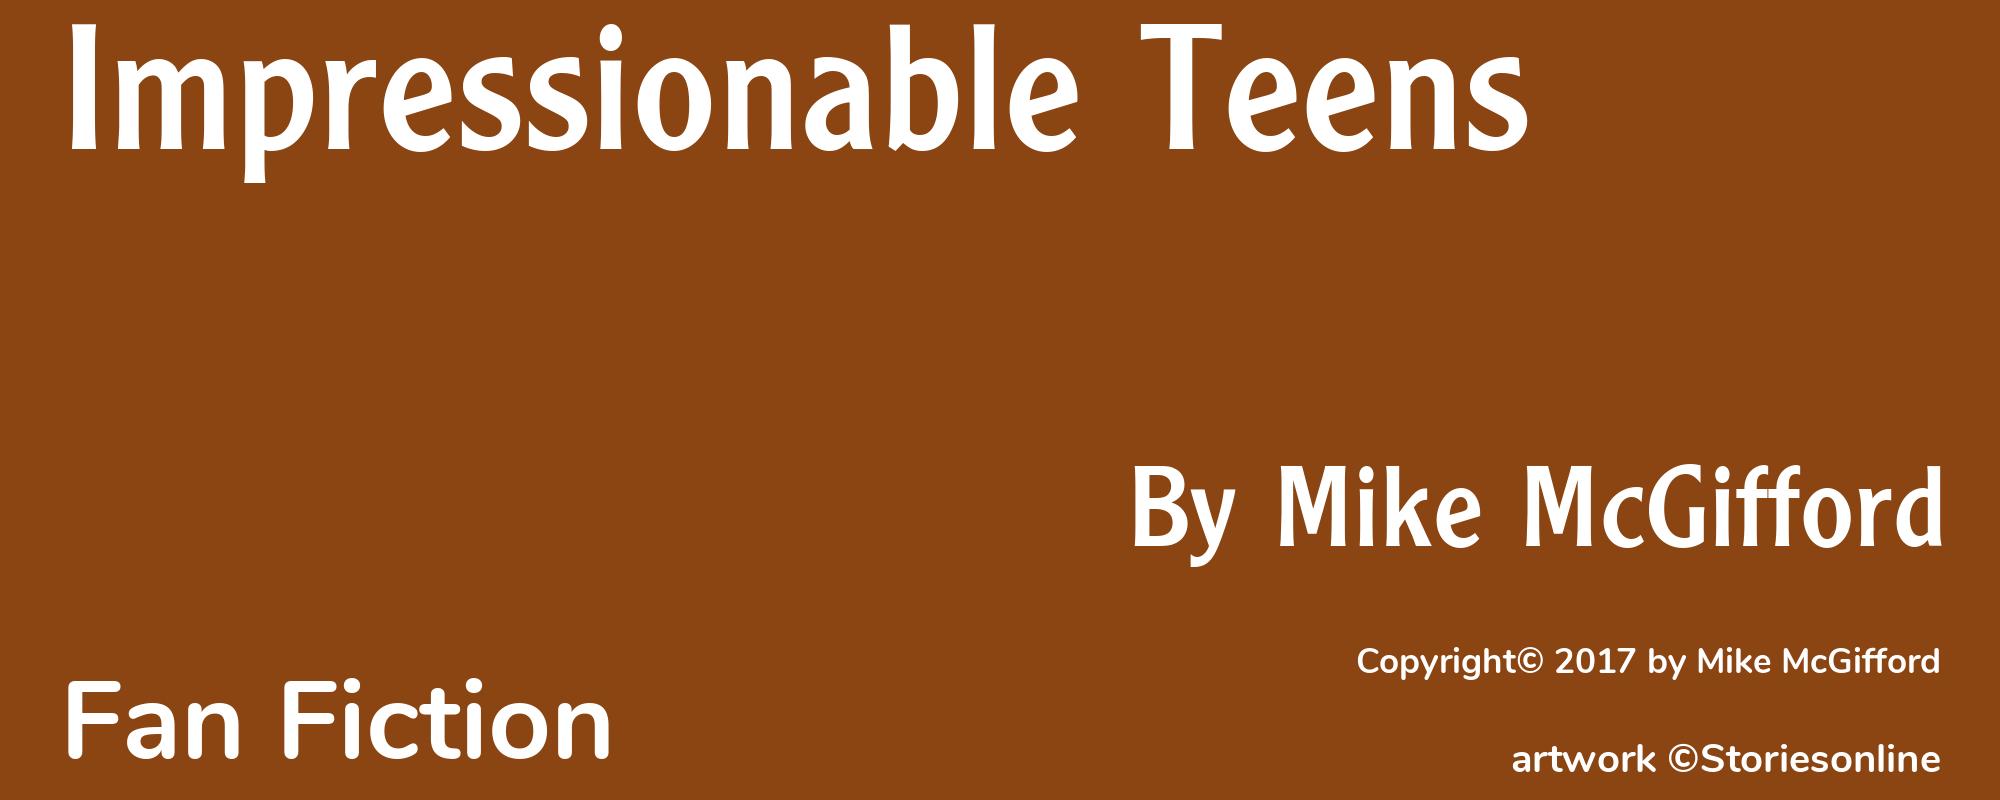 Impressionable Teens - Cover